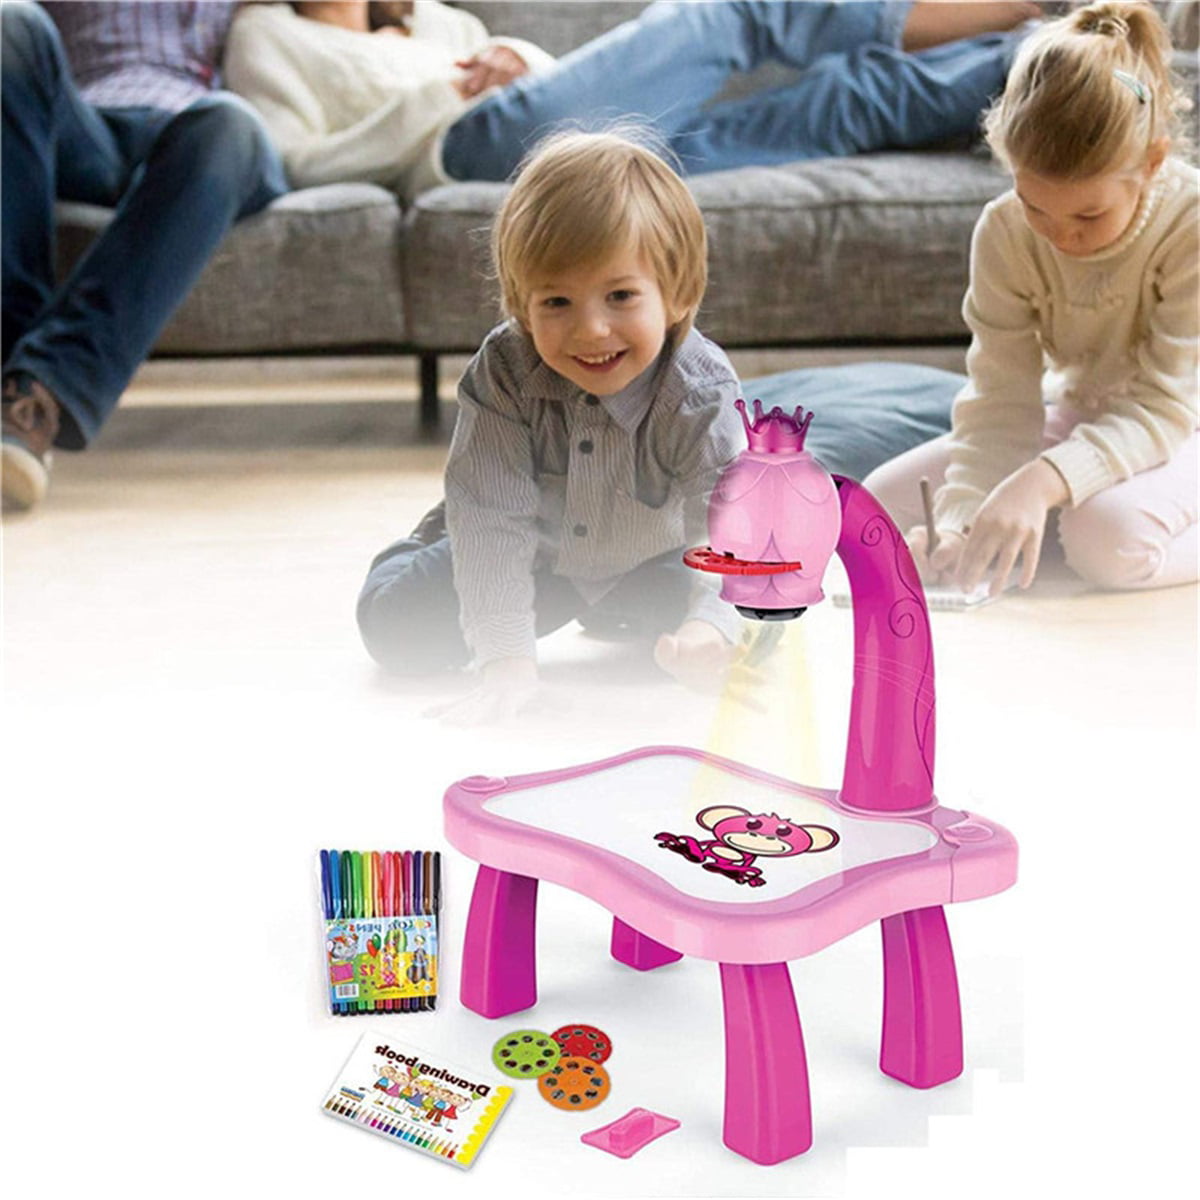 1pc Plastic Learning Toy, Modern Projector Painting Toy For Kids